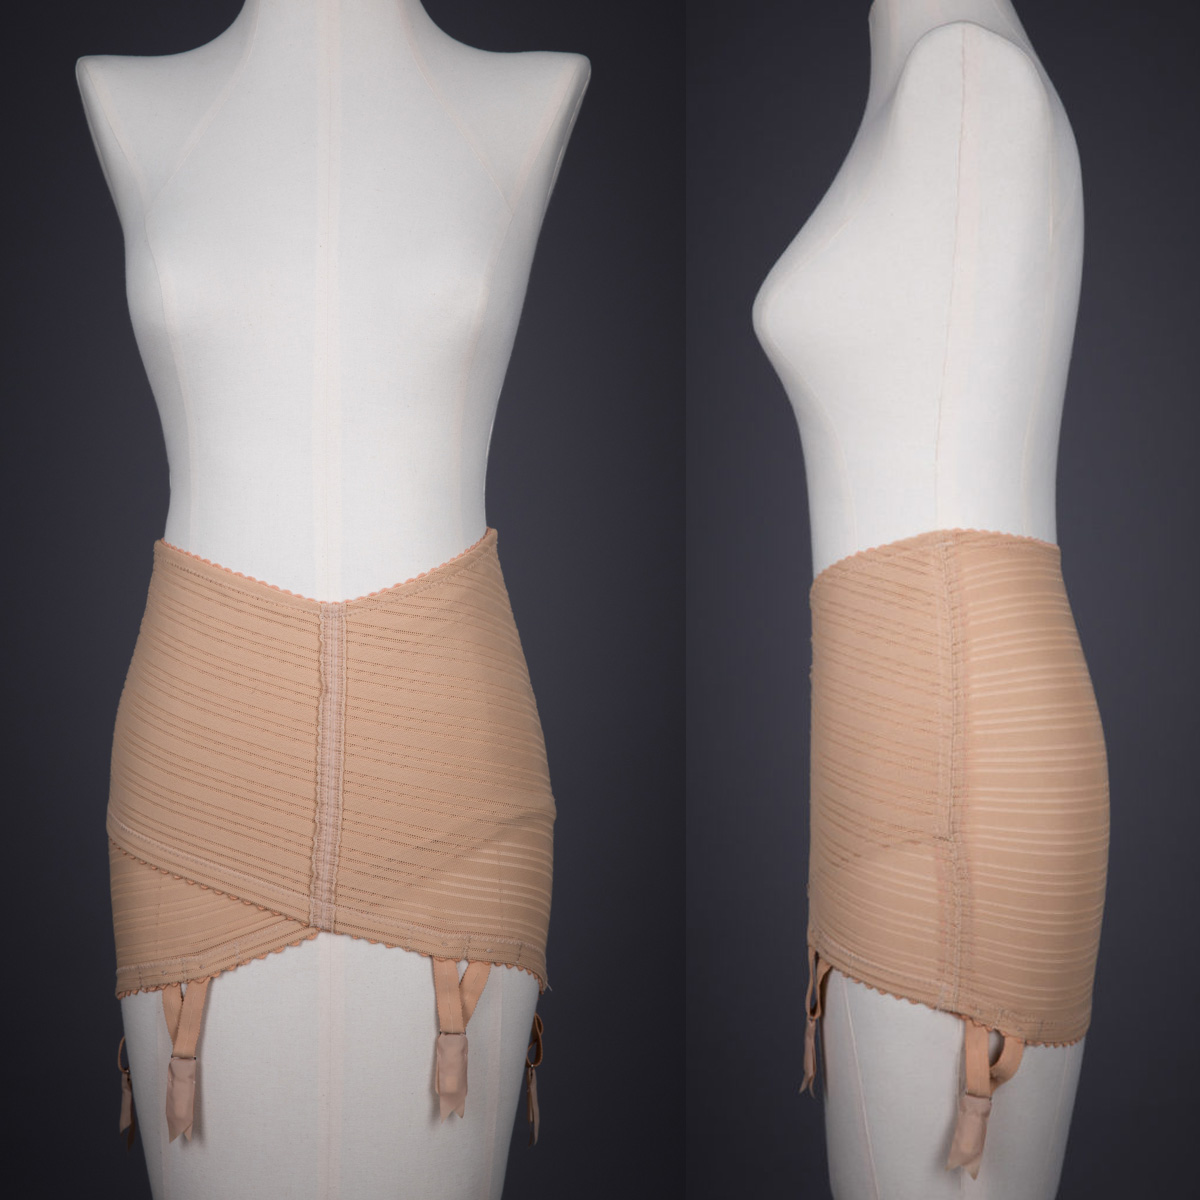 The ‘Little X’ girdle design was a particularly remarkable design for the fact that it was fully elasticated; previously girdles would only stretch horizontally and tended to move around the body during wear. underpinningsmuseum.com/museum-collect… #underpinningsmuseum #fashionhistory